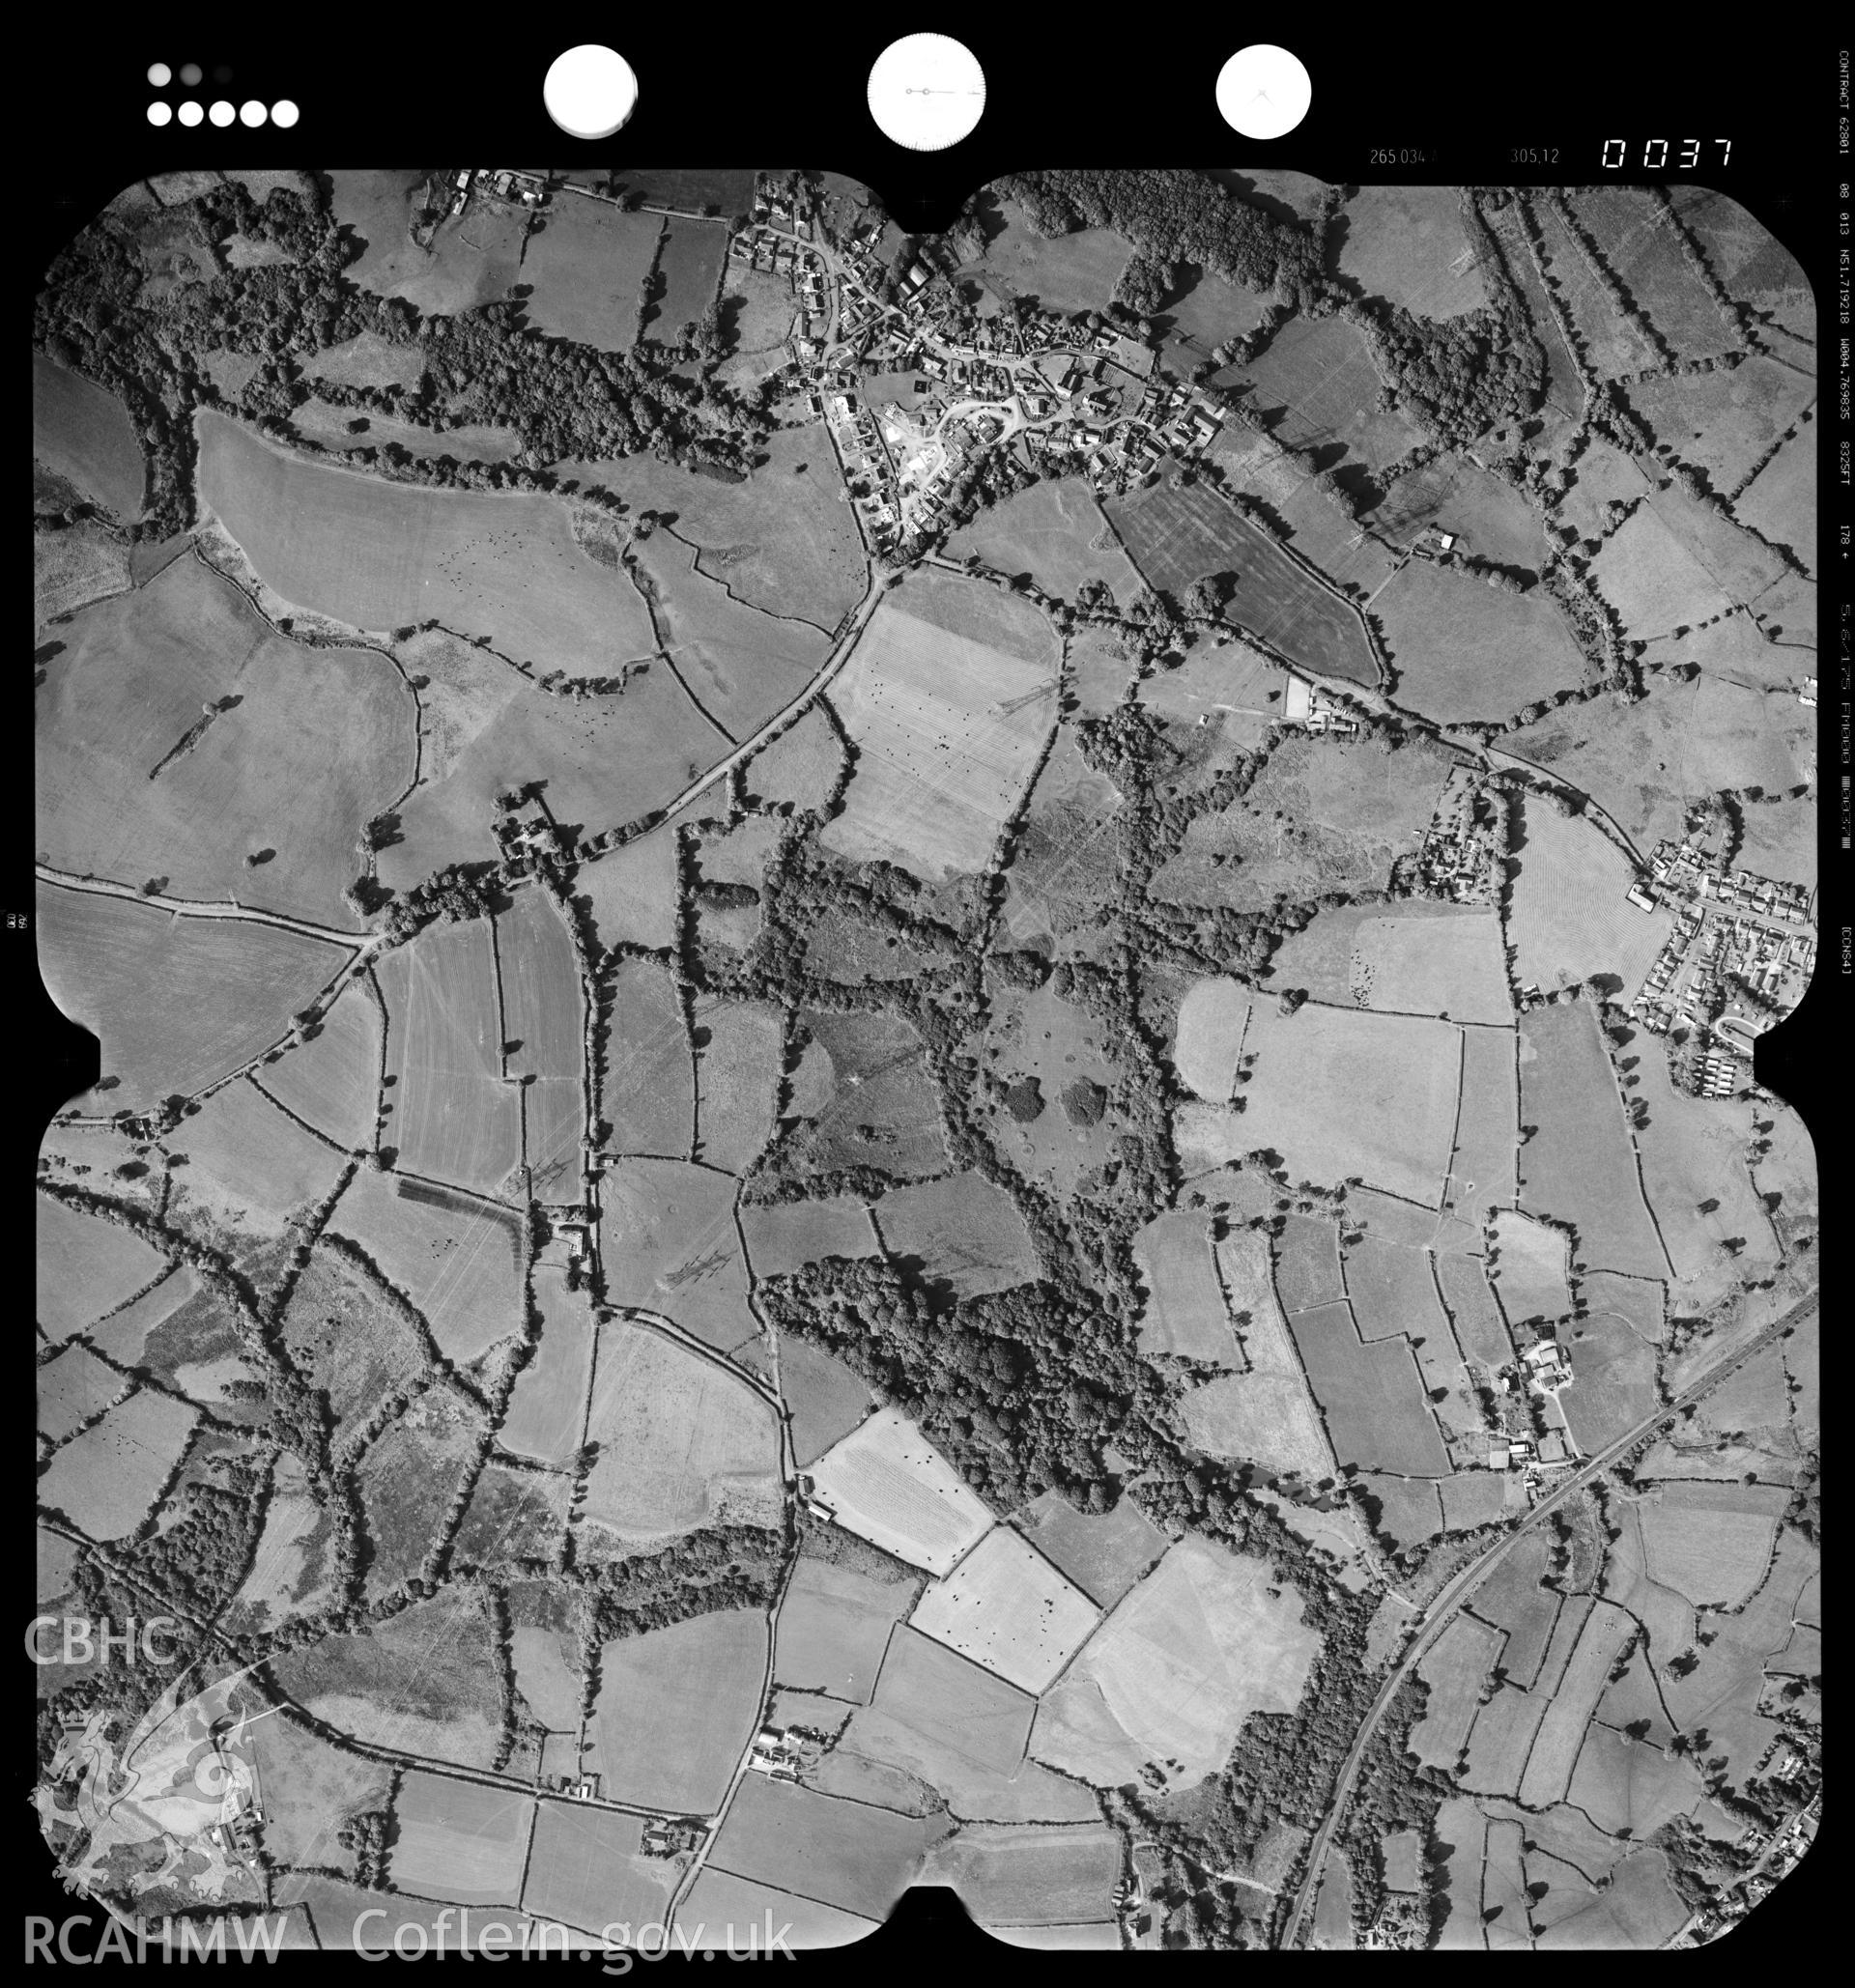 Digitized copy of an aerial photograph showing an area at Broadmoor, Pembrokeshire, taken by Ordnance Survey,  2001.